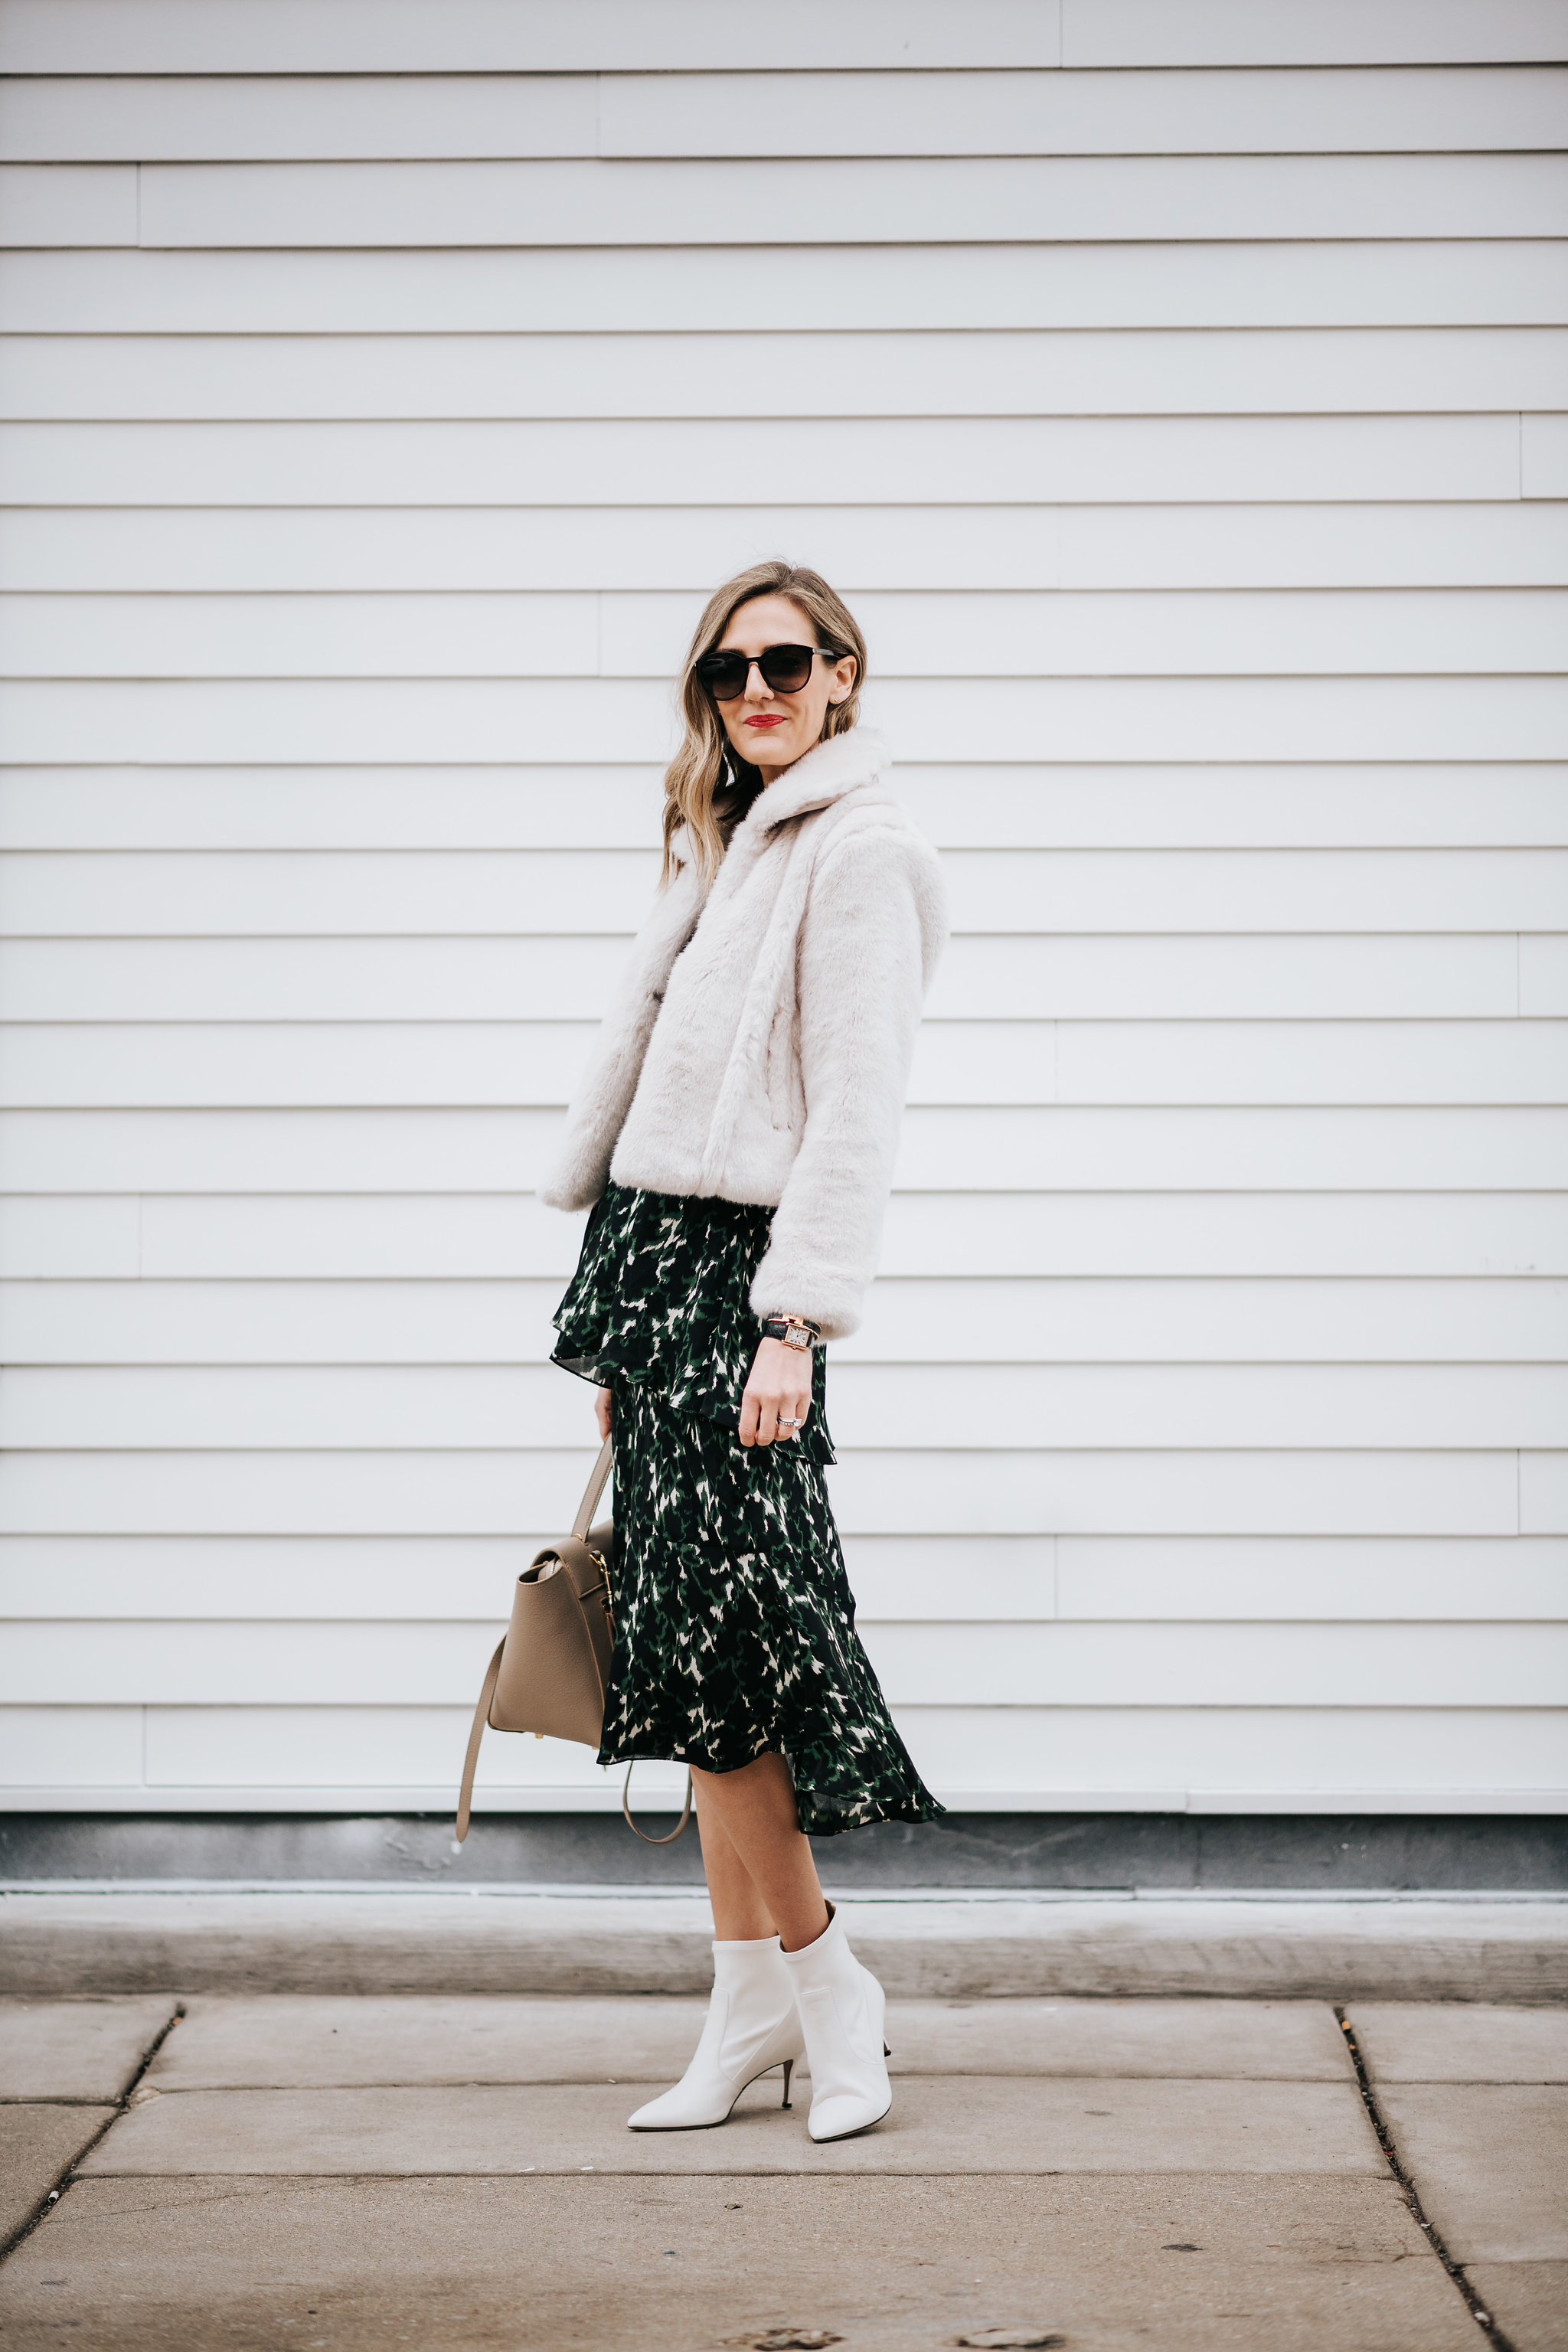 how to wear white booties for spring with a dress skirt transition